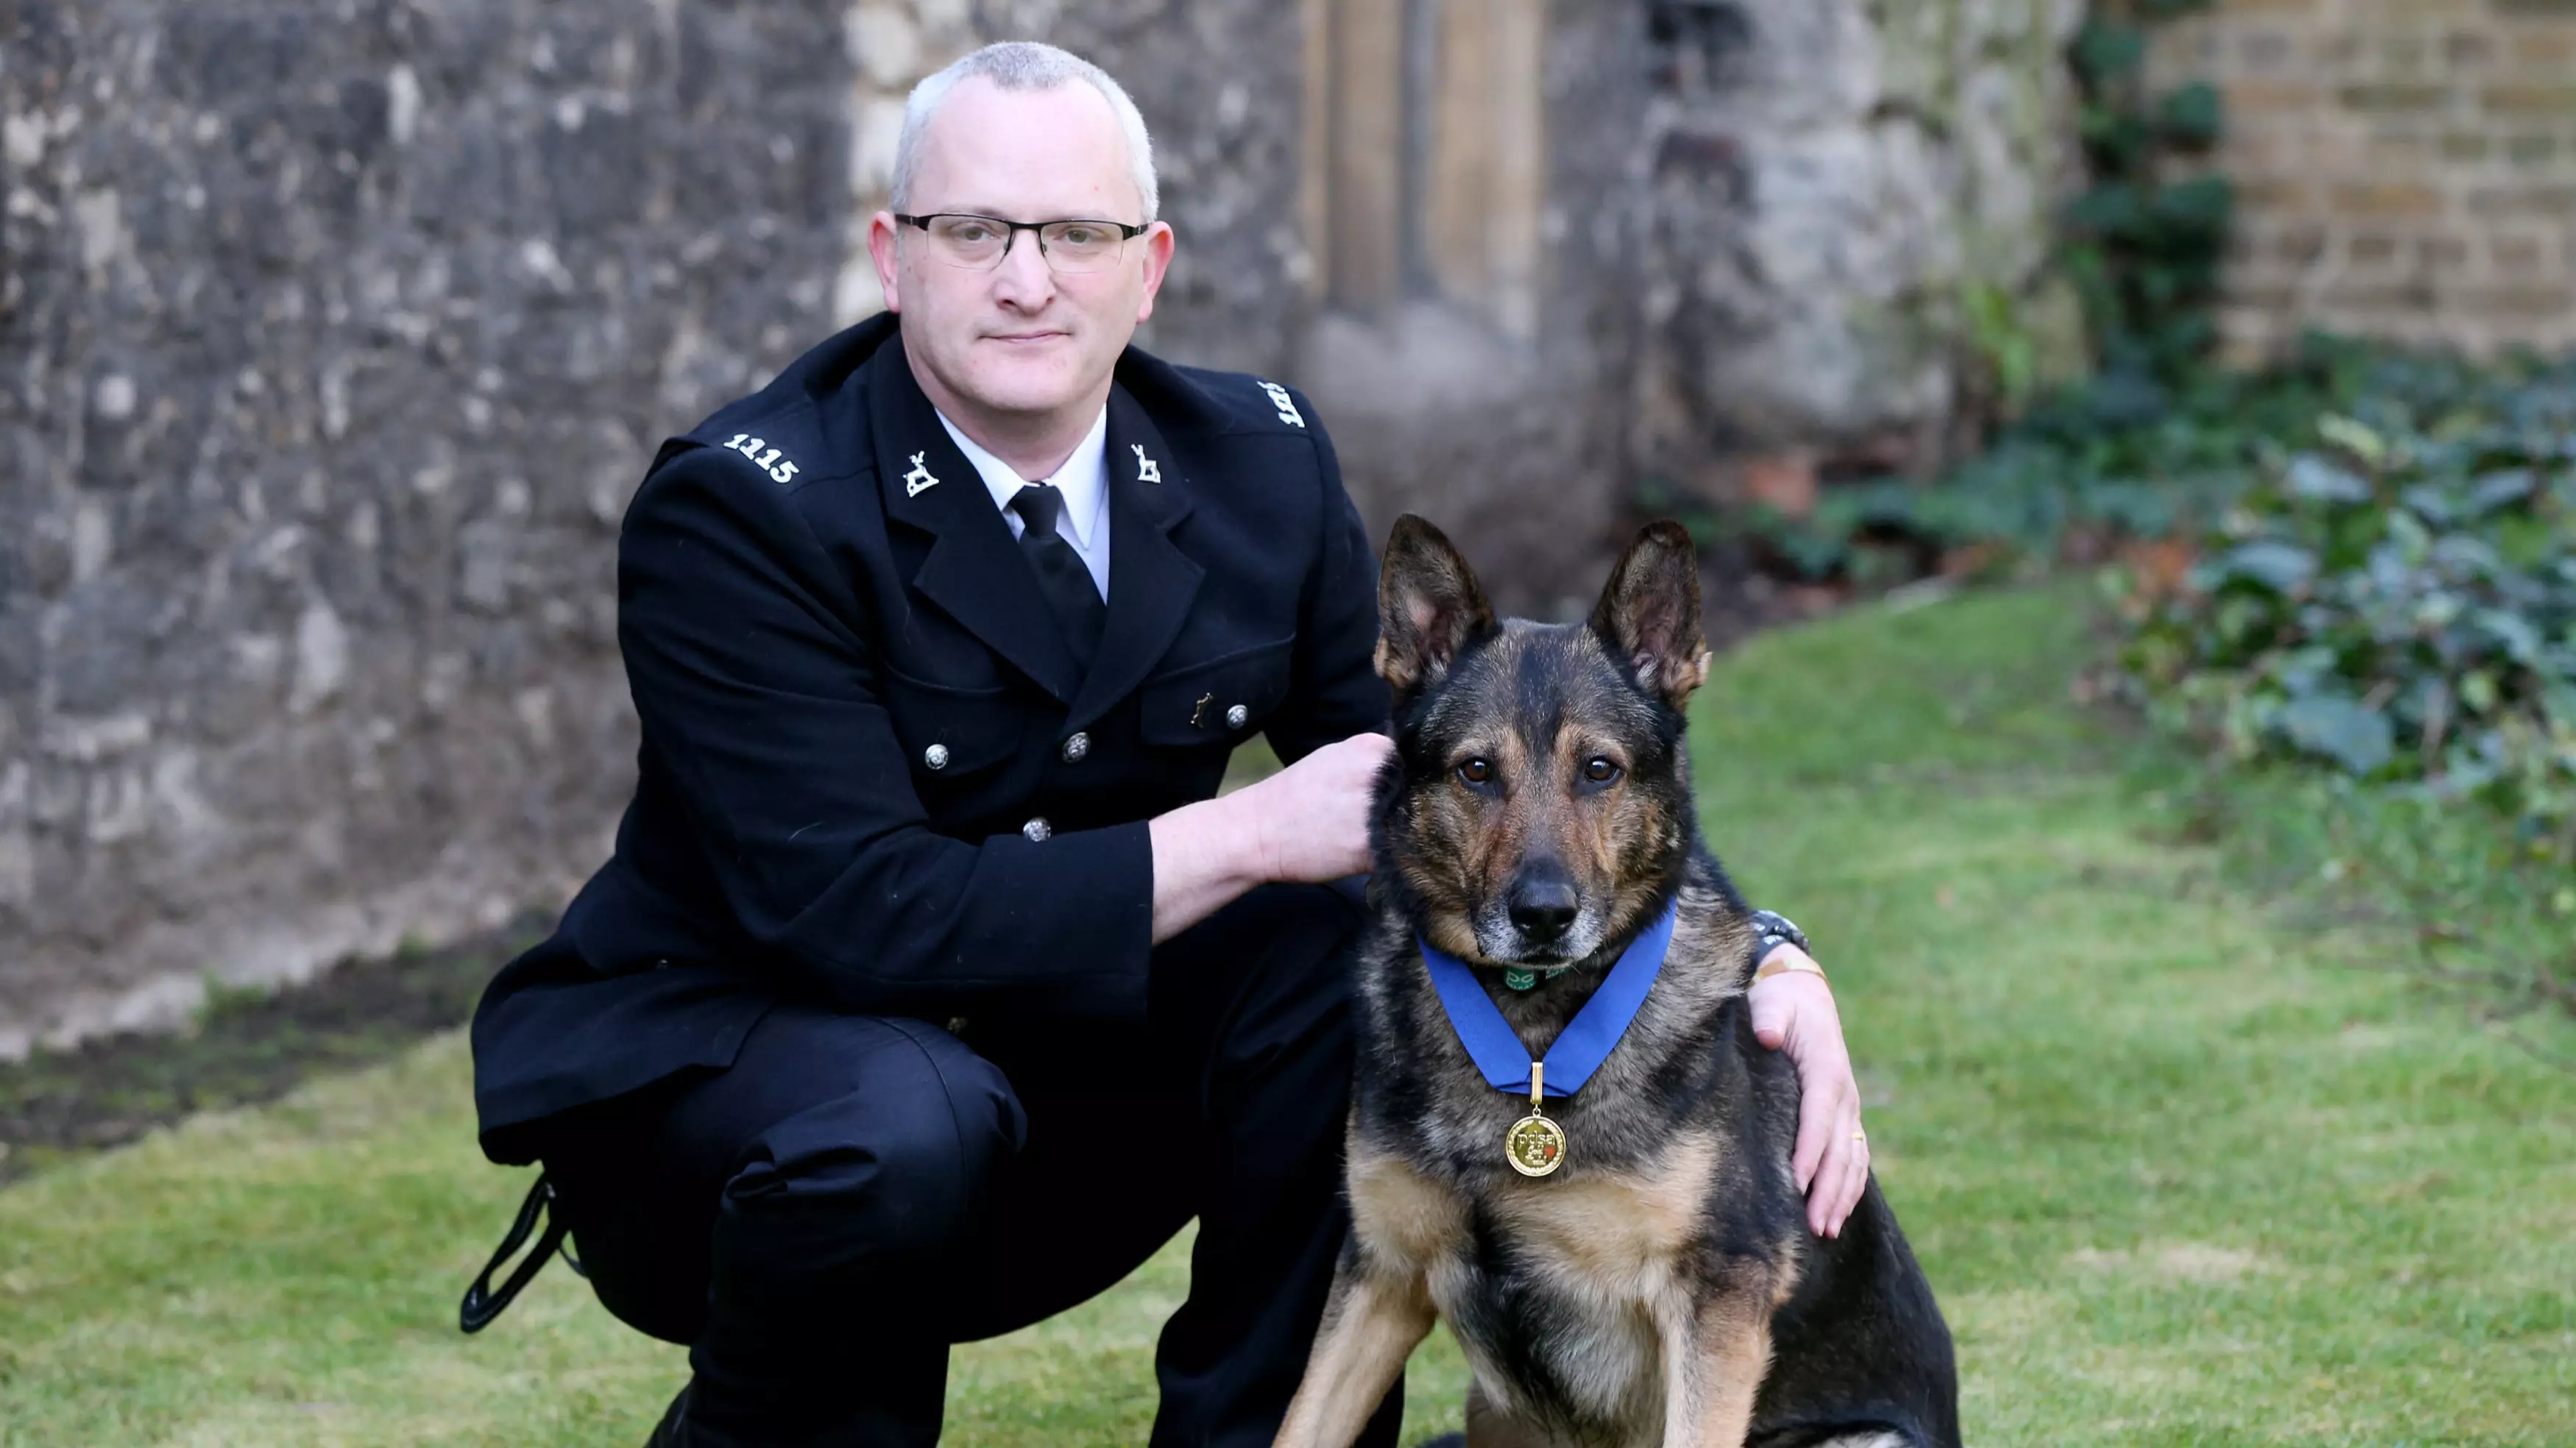 Police Dogs And Horses To Be Protected By Law From Saturday After Officer's Campaign